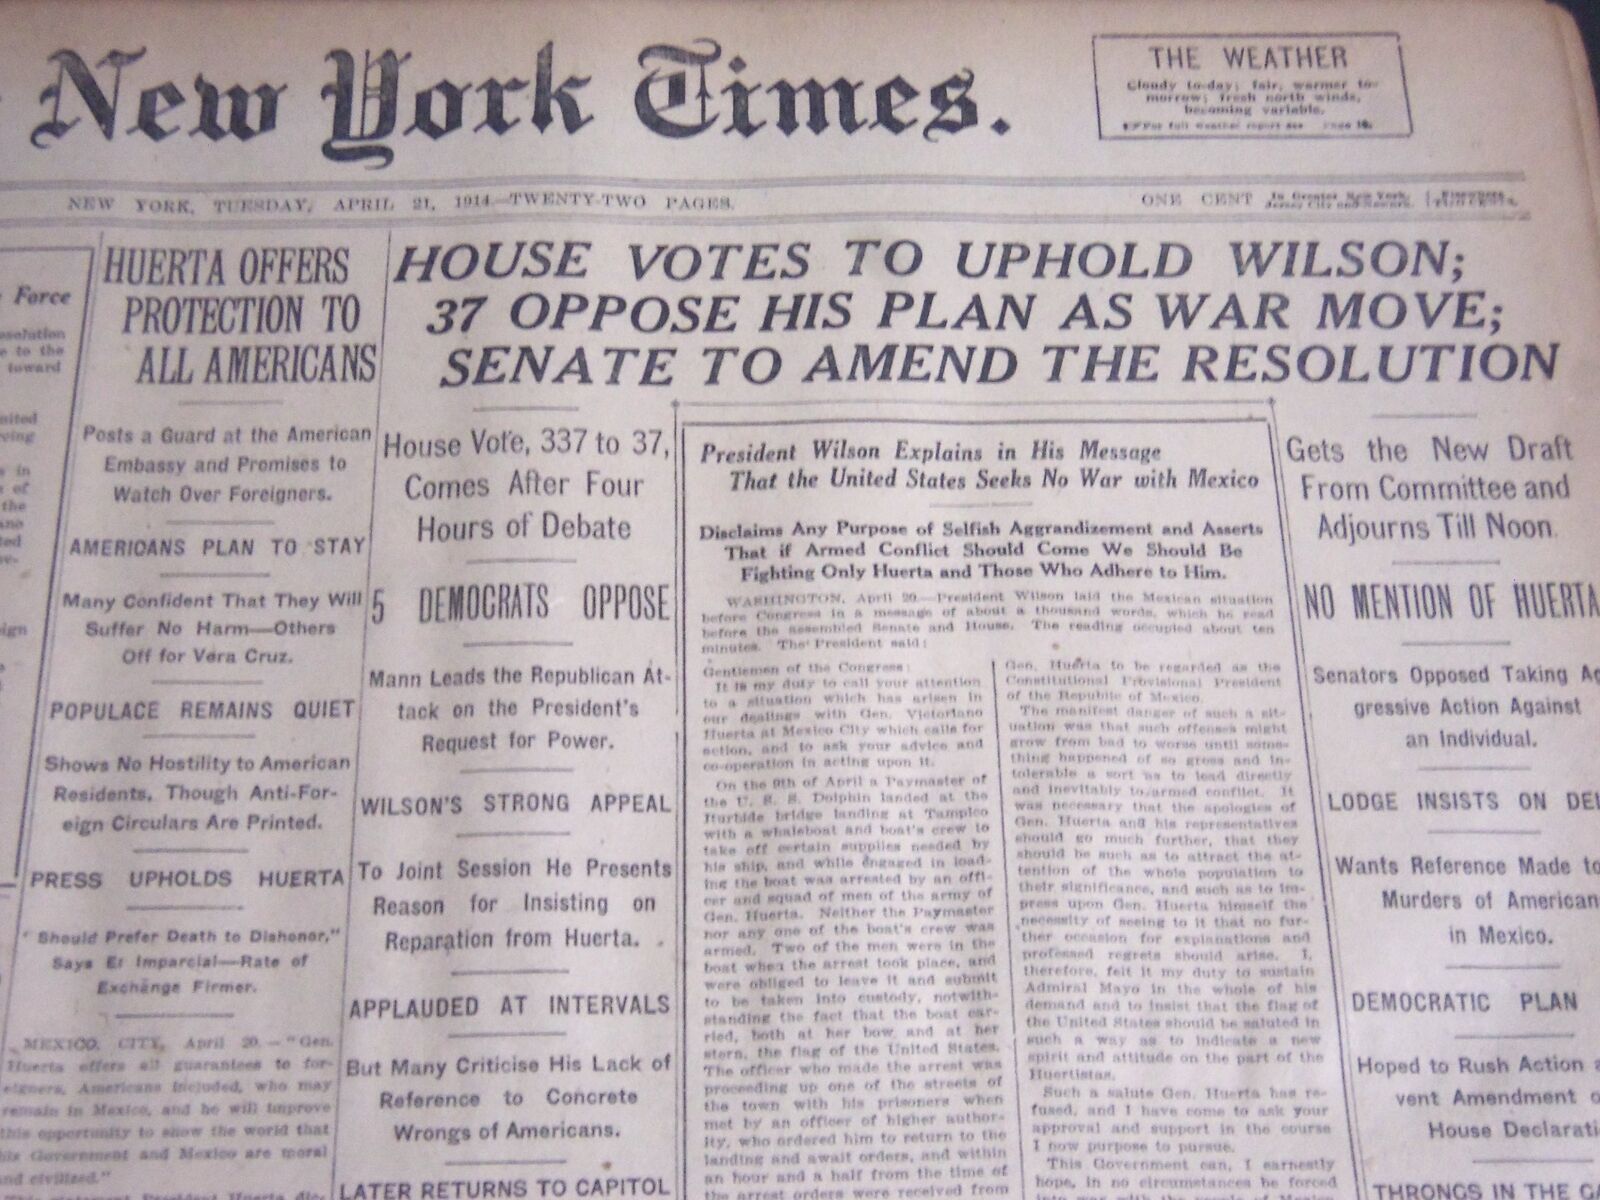 1914 APRIL 21 NEW YORK TIMES - HOUSE VOTES TO UPHOLD WILSON - NT 6650